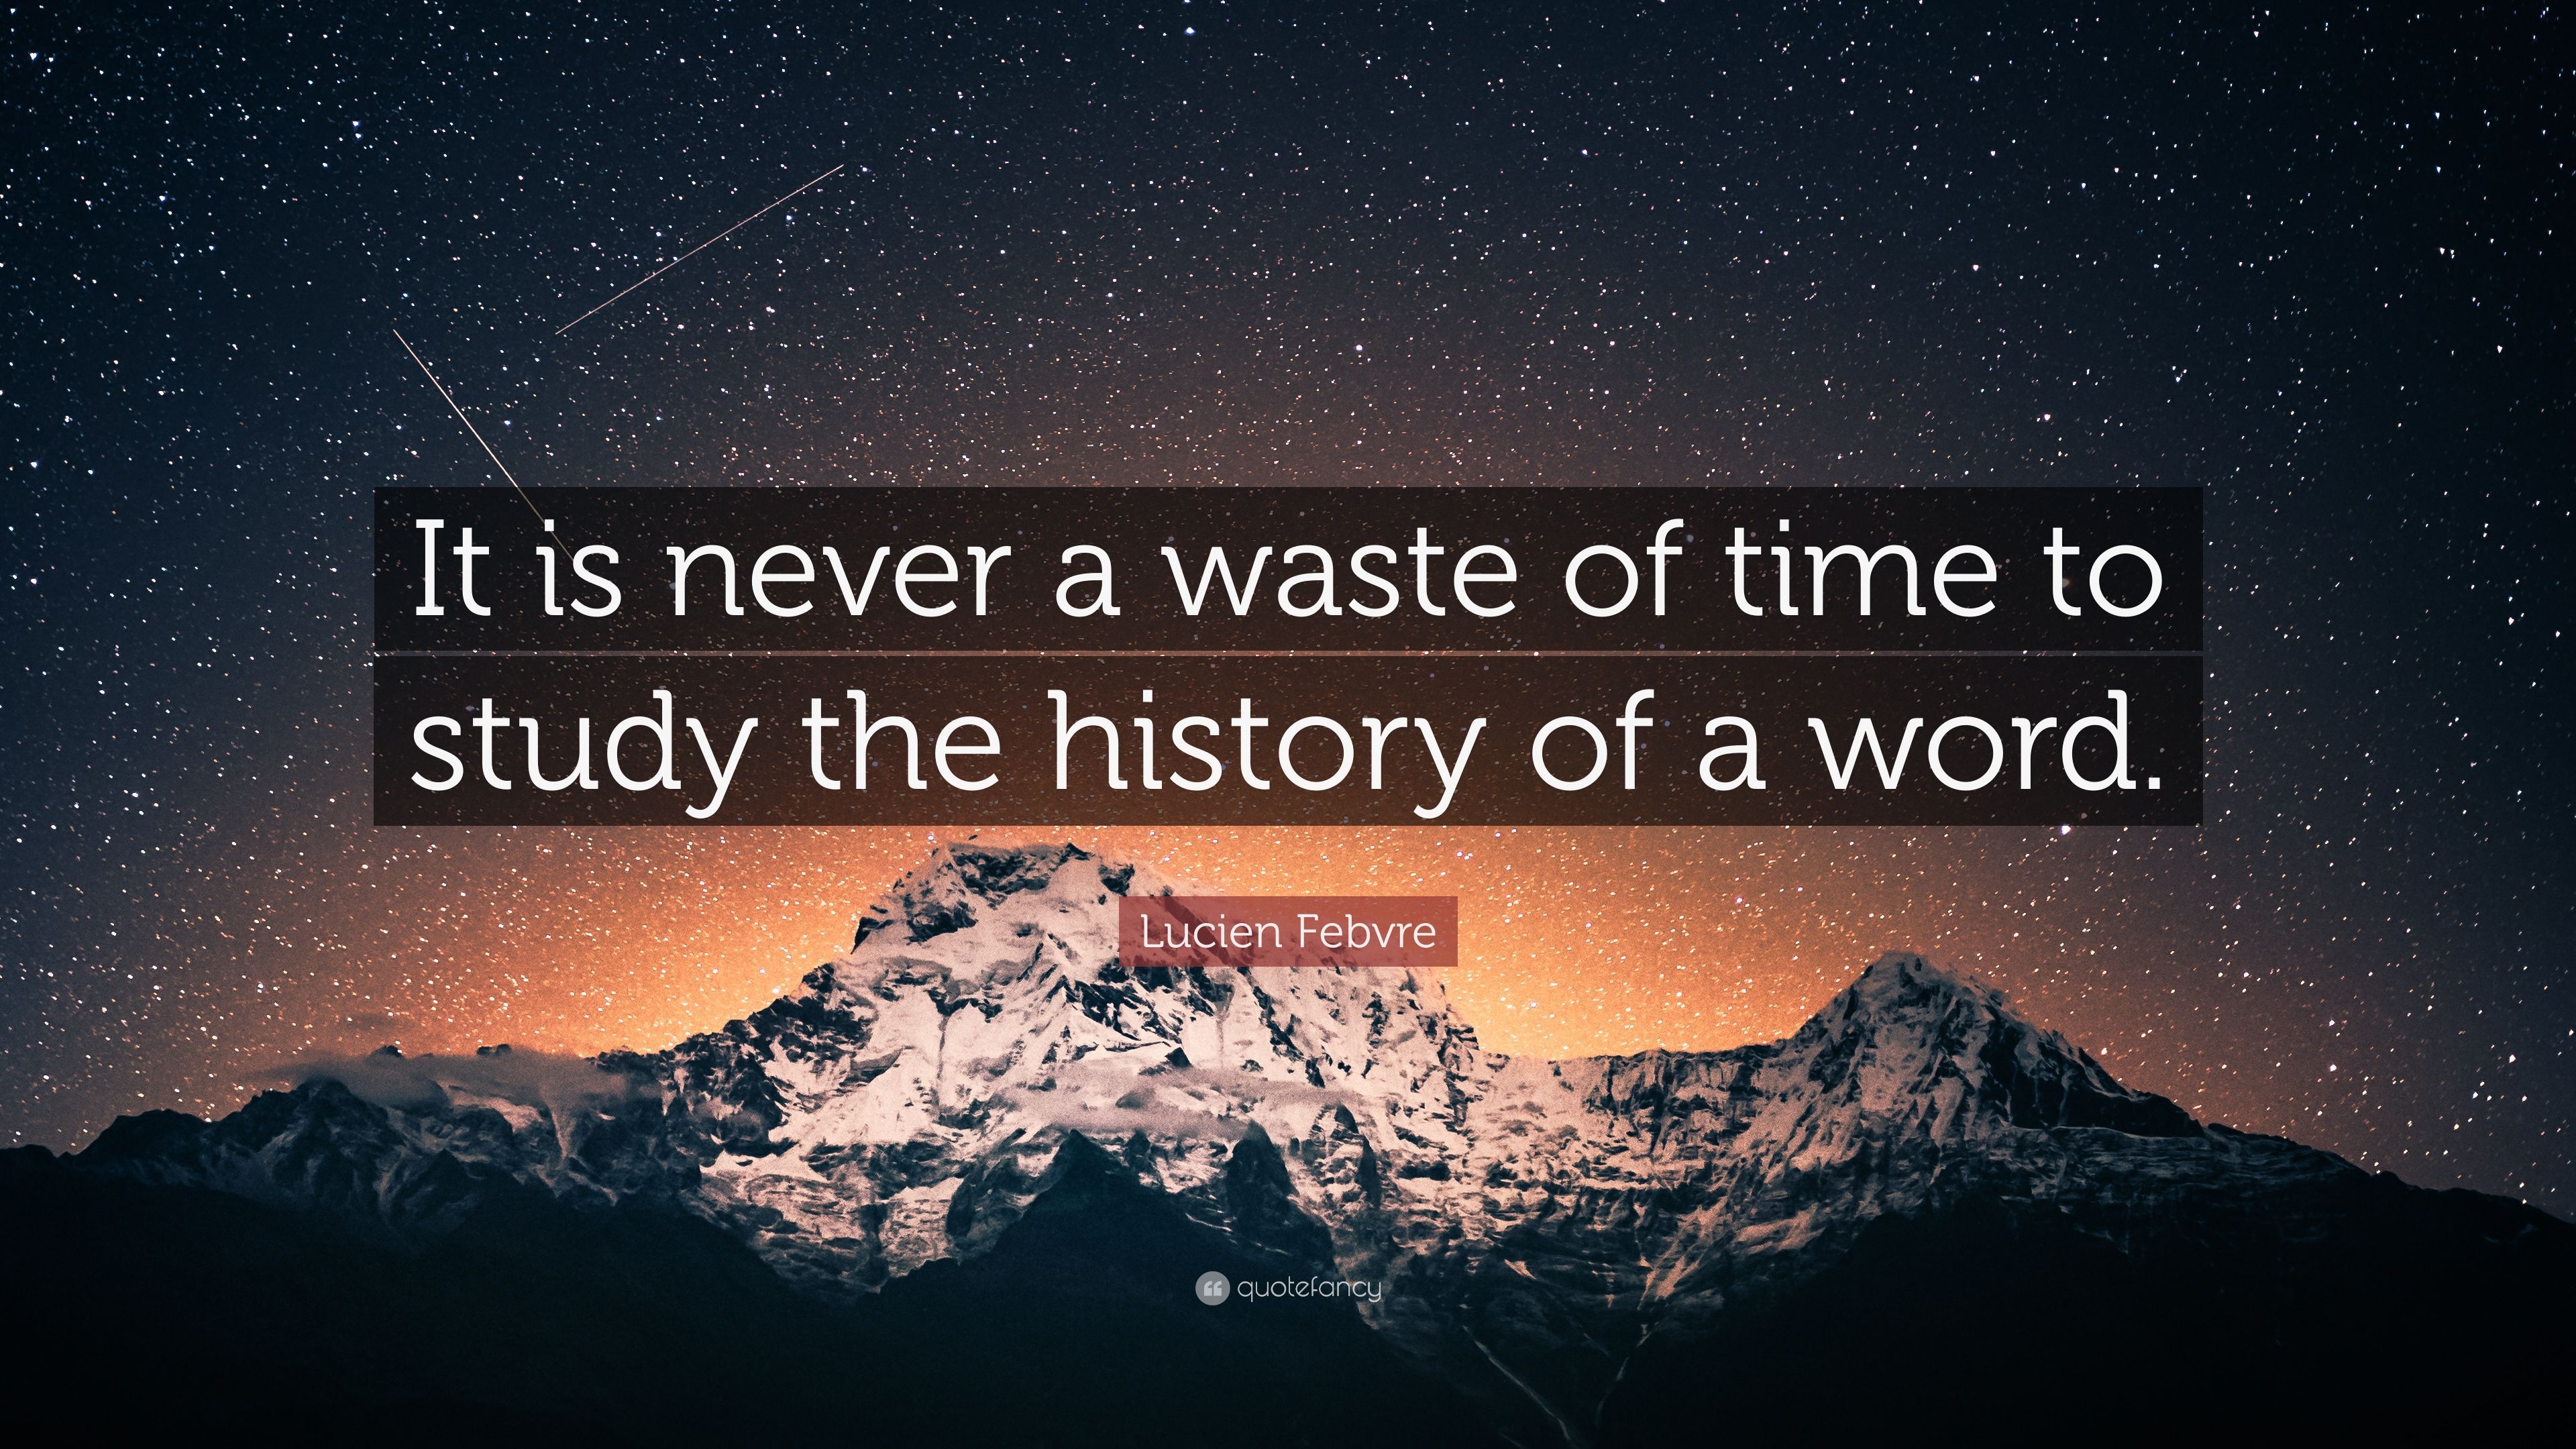 Lucien Febvre Quote: “It is never a waste of time to study the history of a word.” (7 wallpaper)